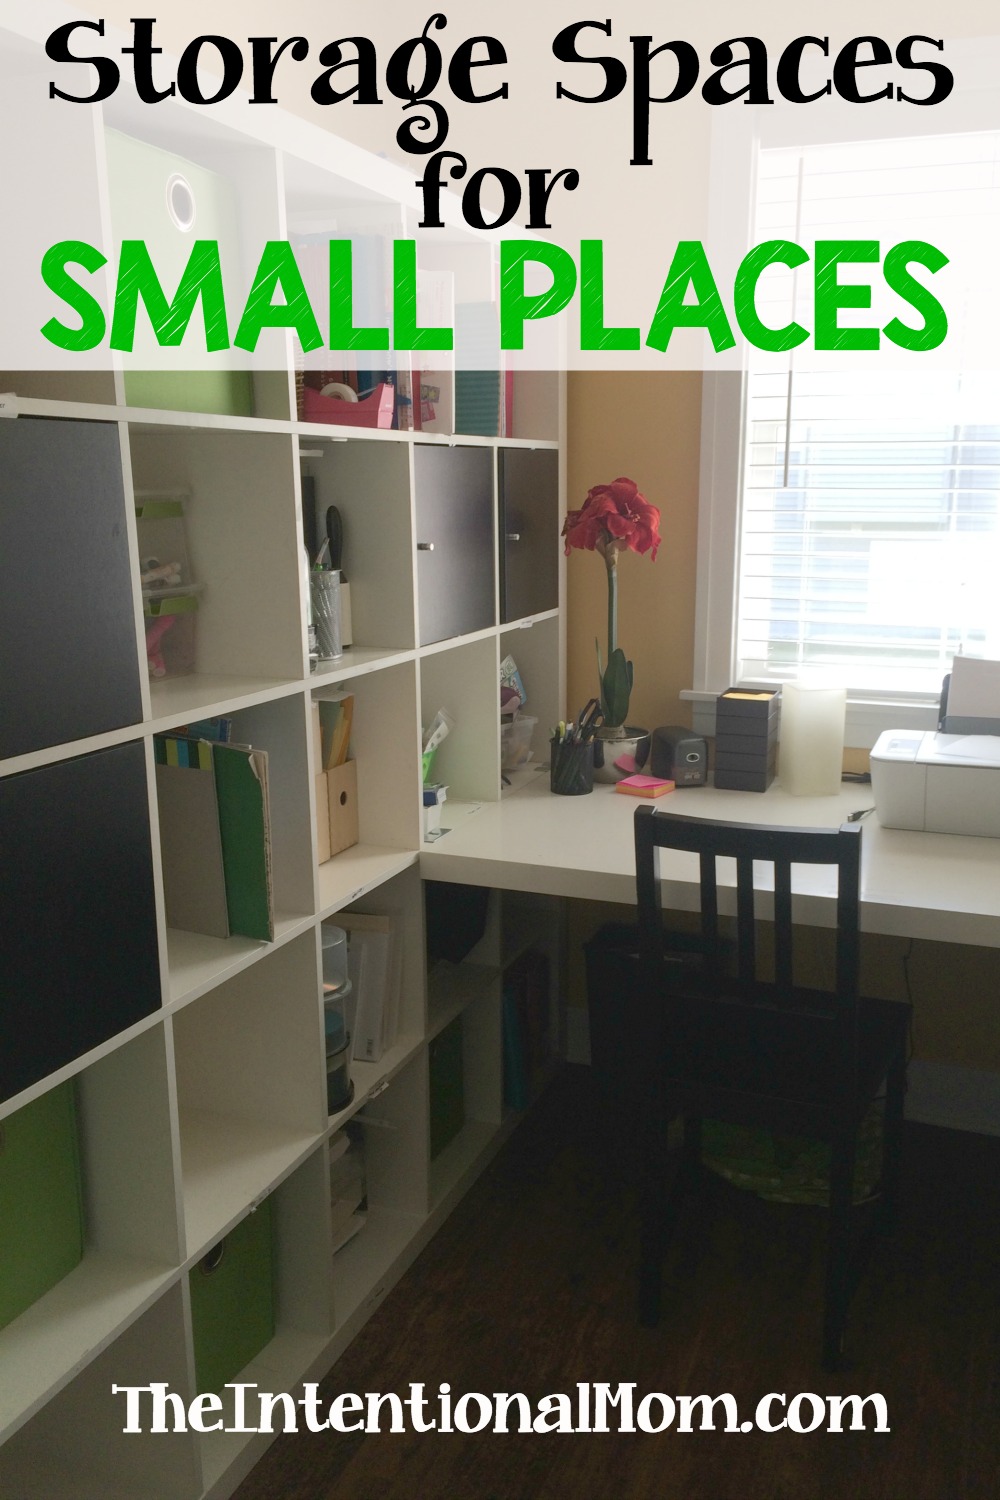 Storage Spaces for Small Places